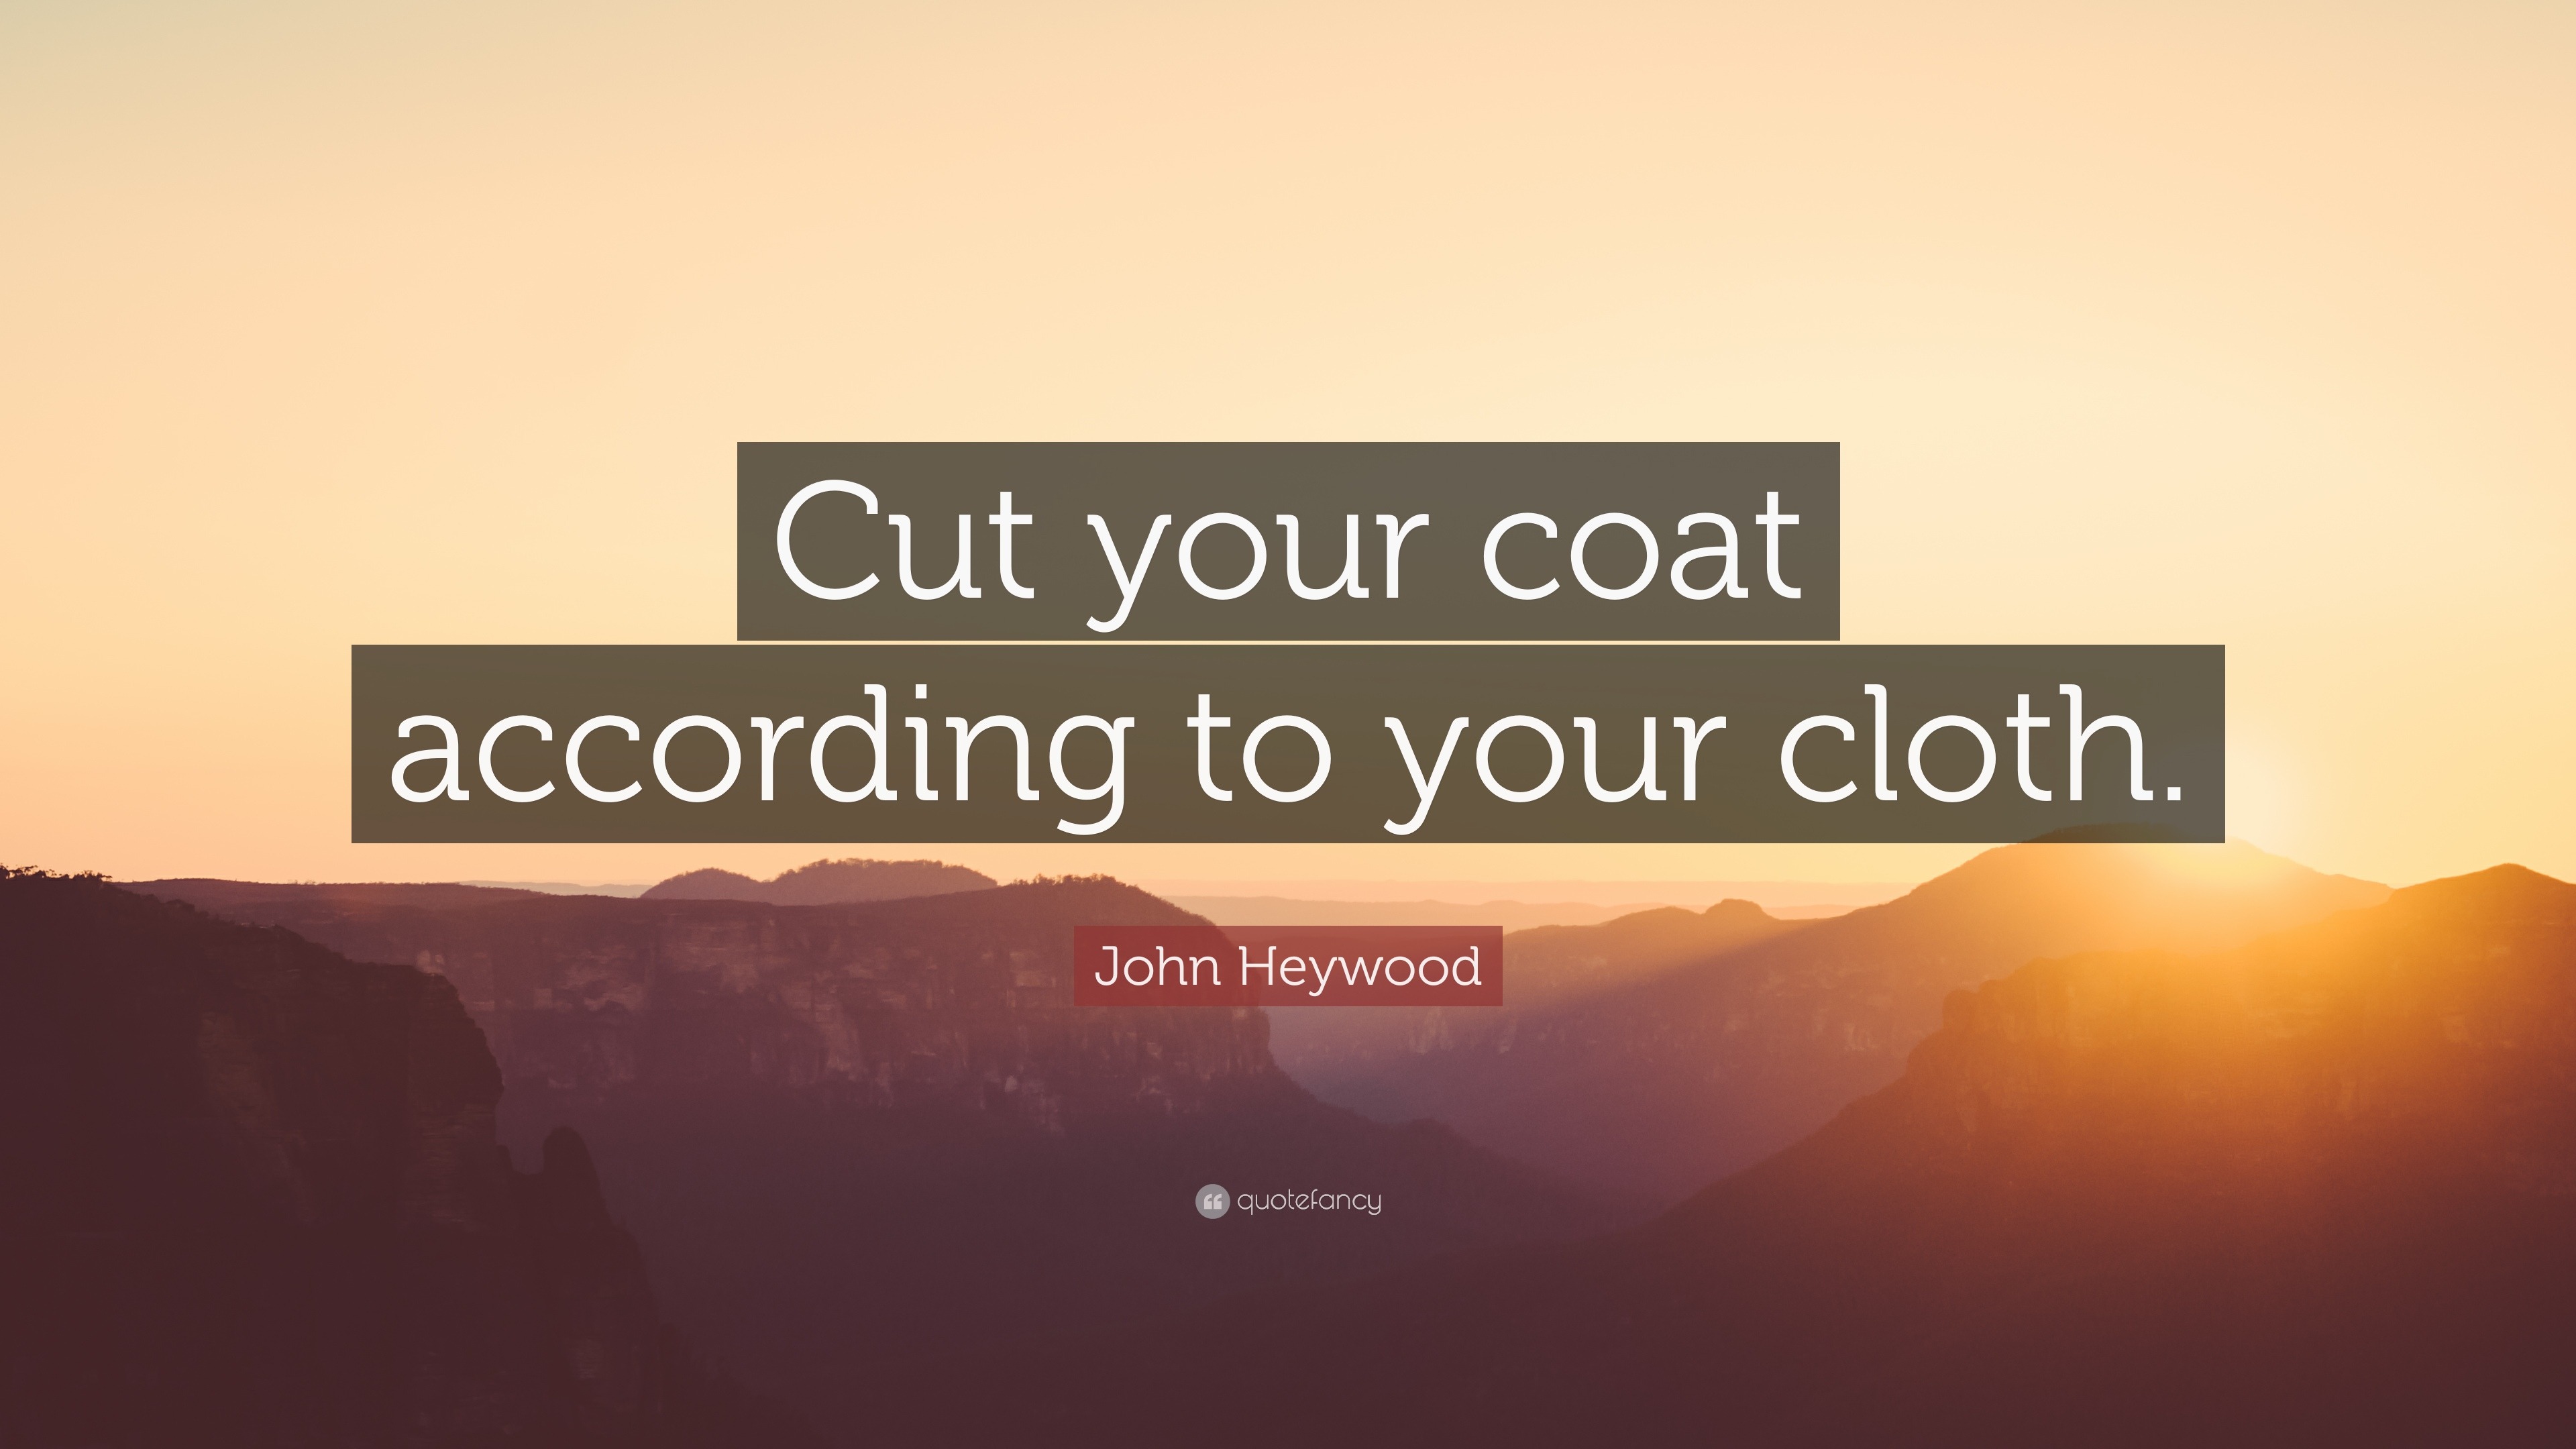 story with moral cut your coat according to your cloth